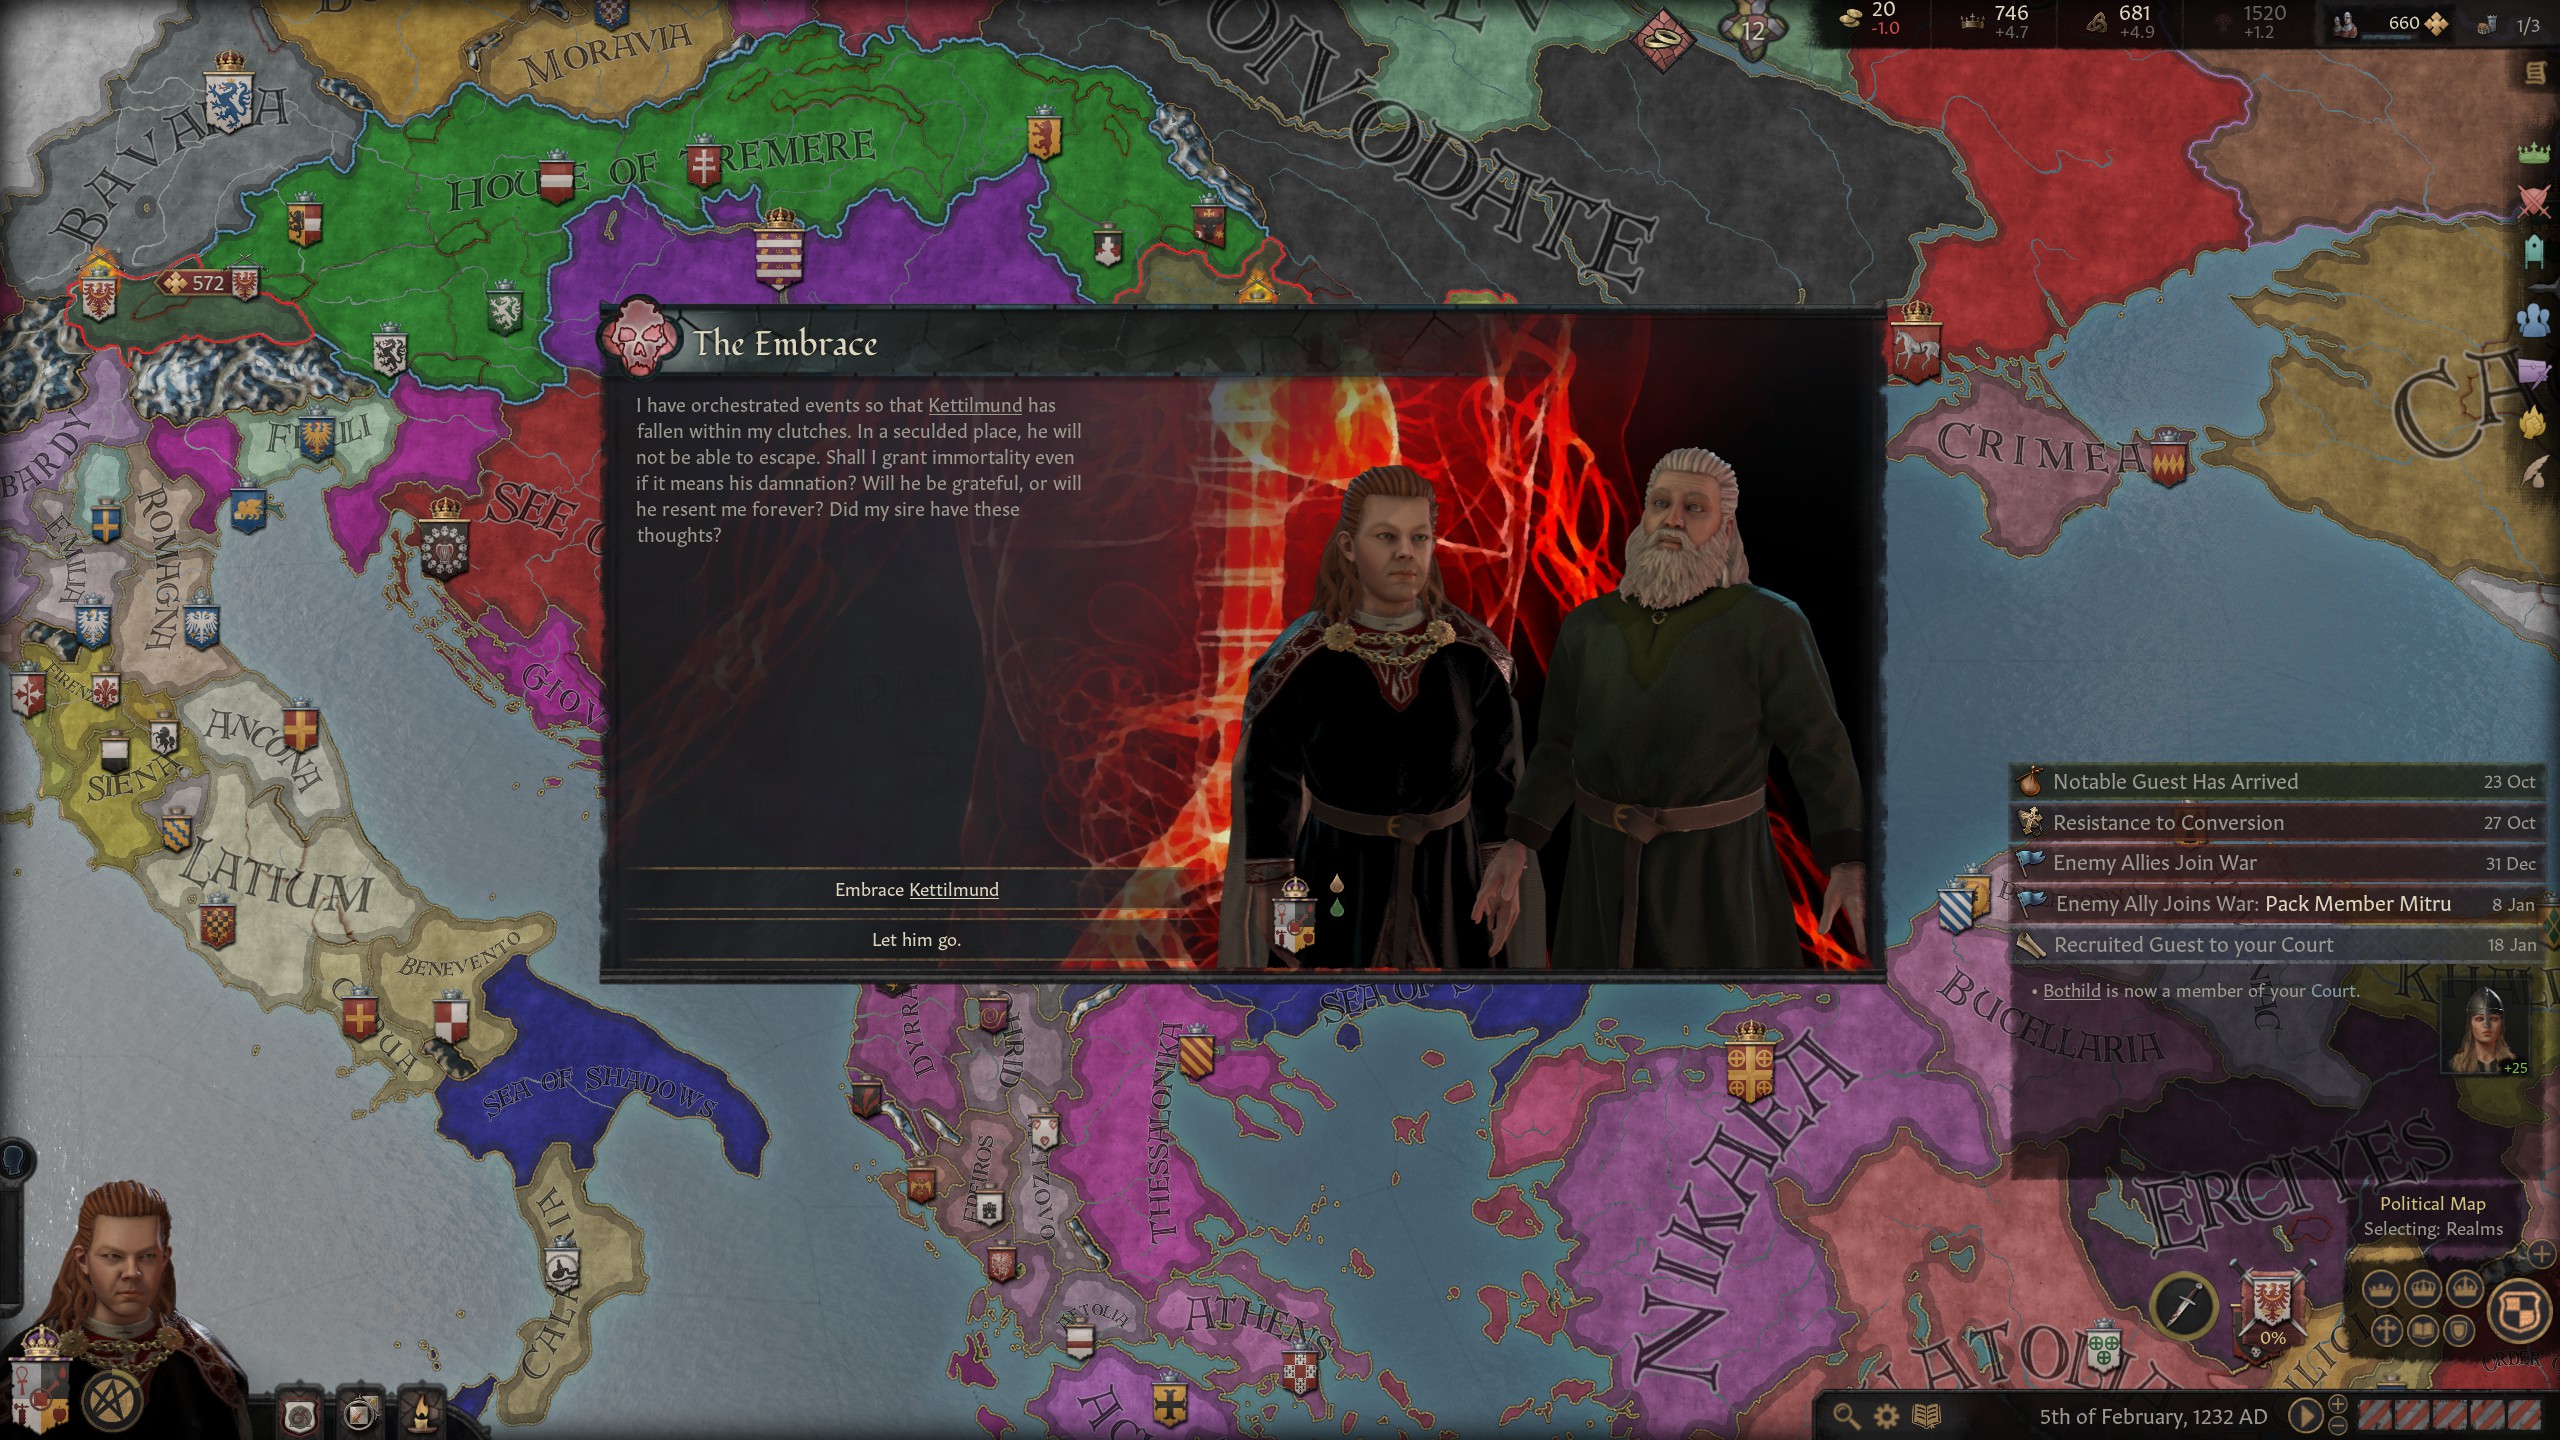 An event screen for the Crusader Kings 3 mod, Princes of Darkness